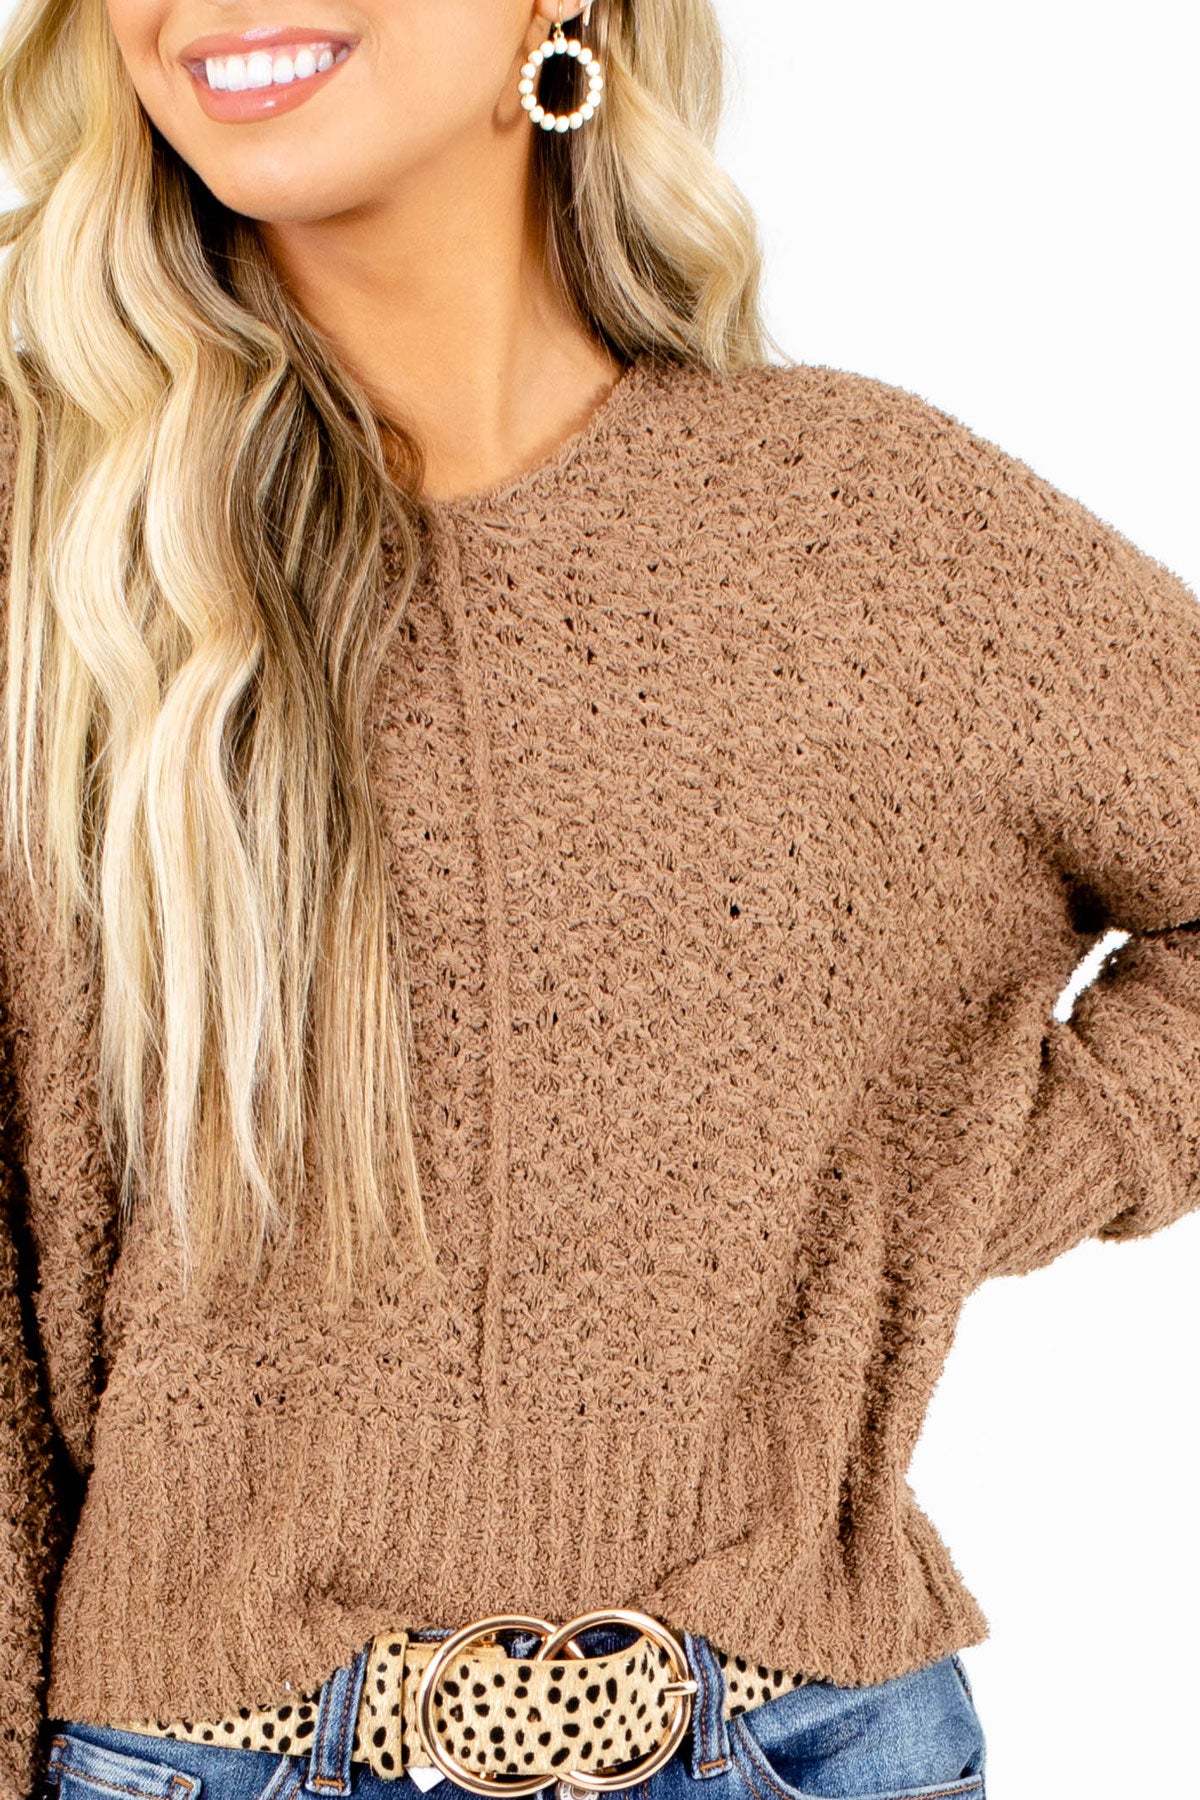 Cozy and Affordable Brown Sweater For Fall